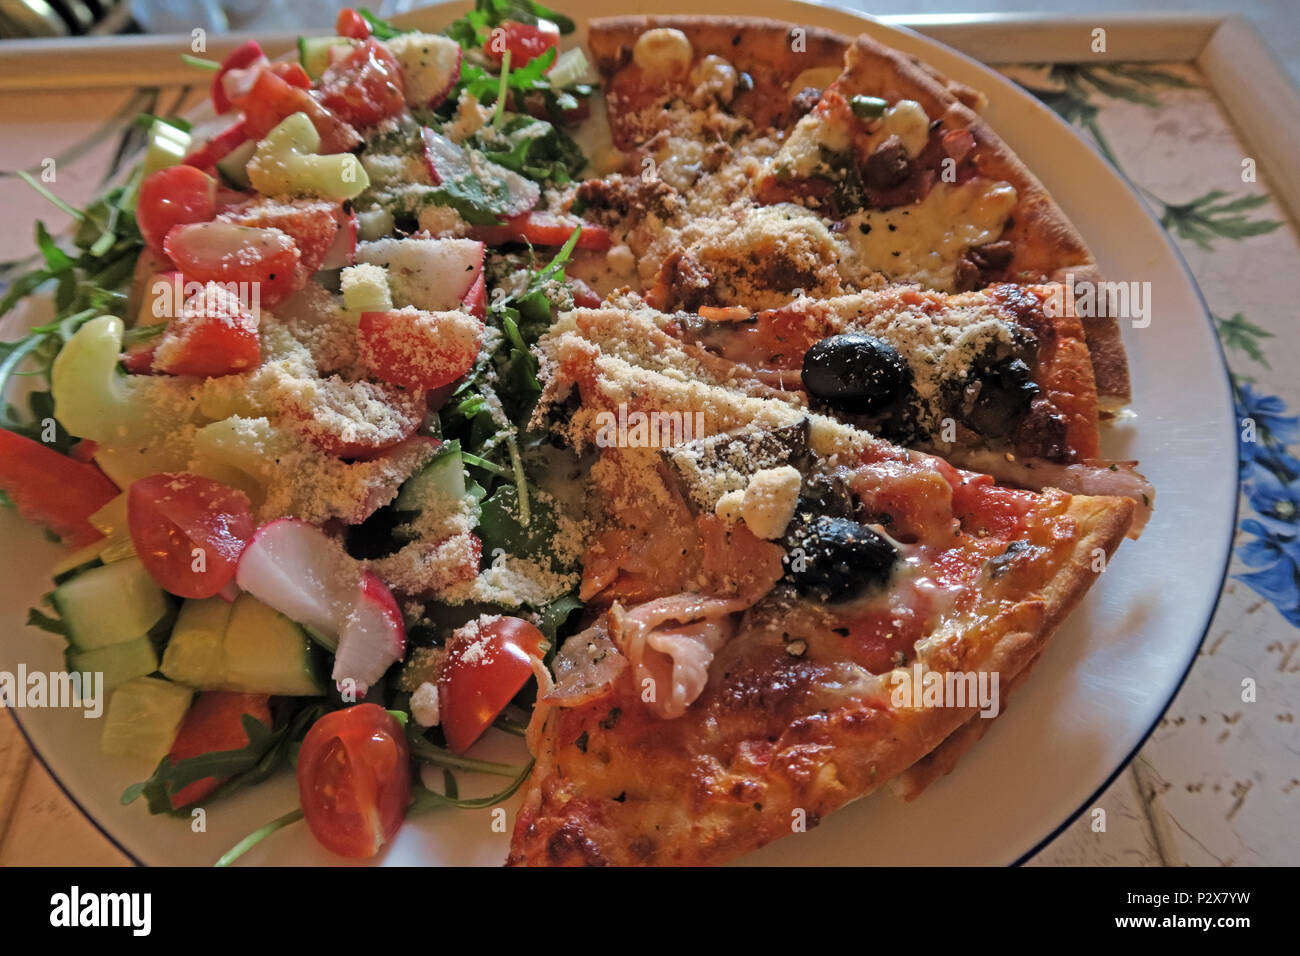 High calorie home pizza, with salad, Parmesan cheese, olives, ham, chicken Stock Photo